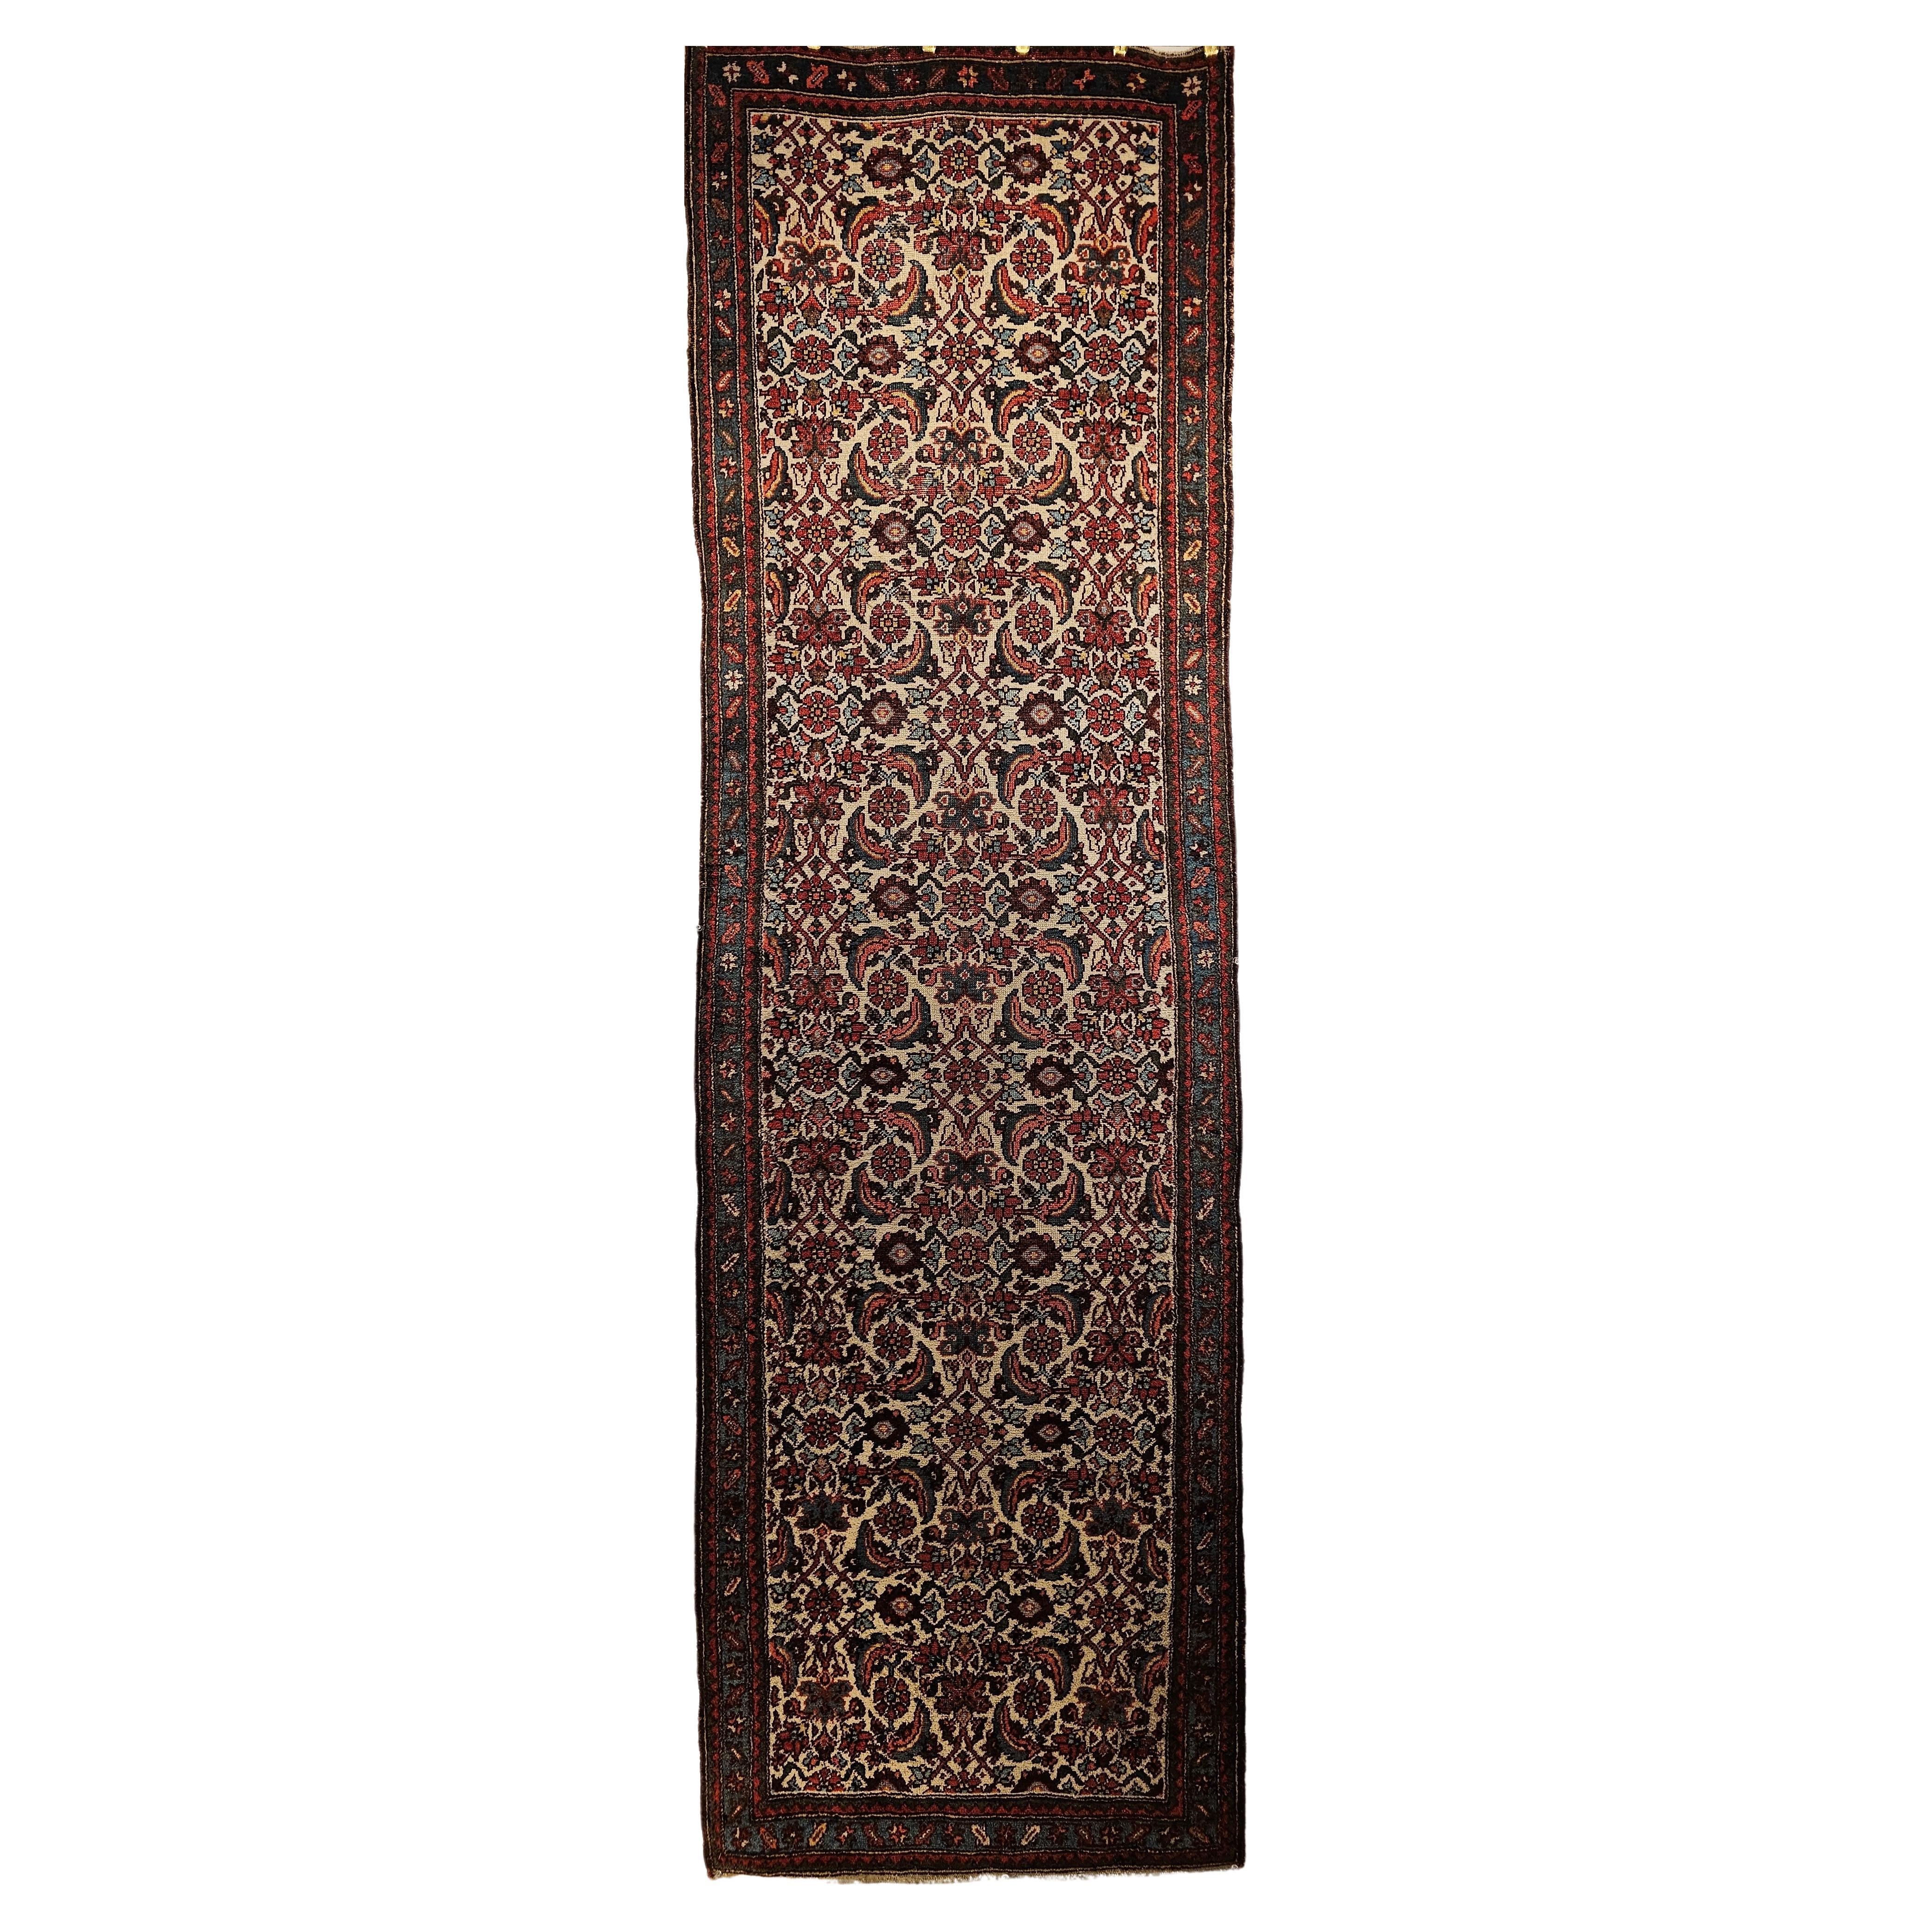  A vintage Persian Bidjar runner in an allover Herati pattern in ivory, French blue, brown, and red colors from the 1st quarter of the 20th century.  The rug has a classic Herati design set in a very rare and desirable ivory background. The design